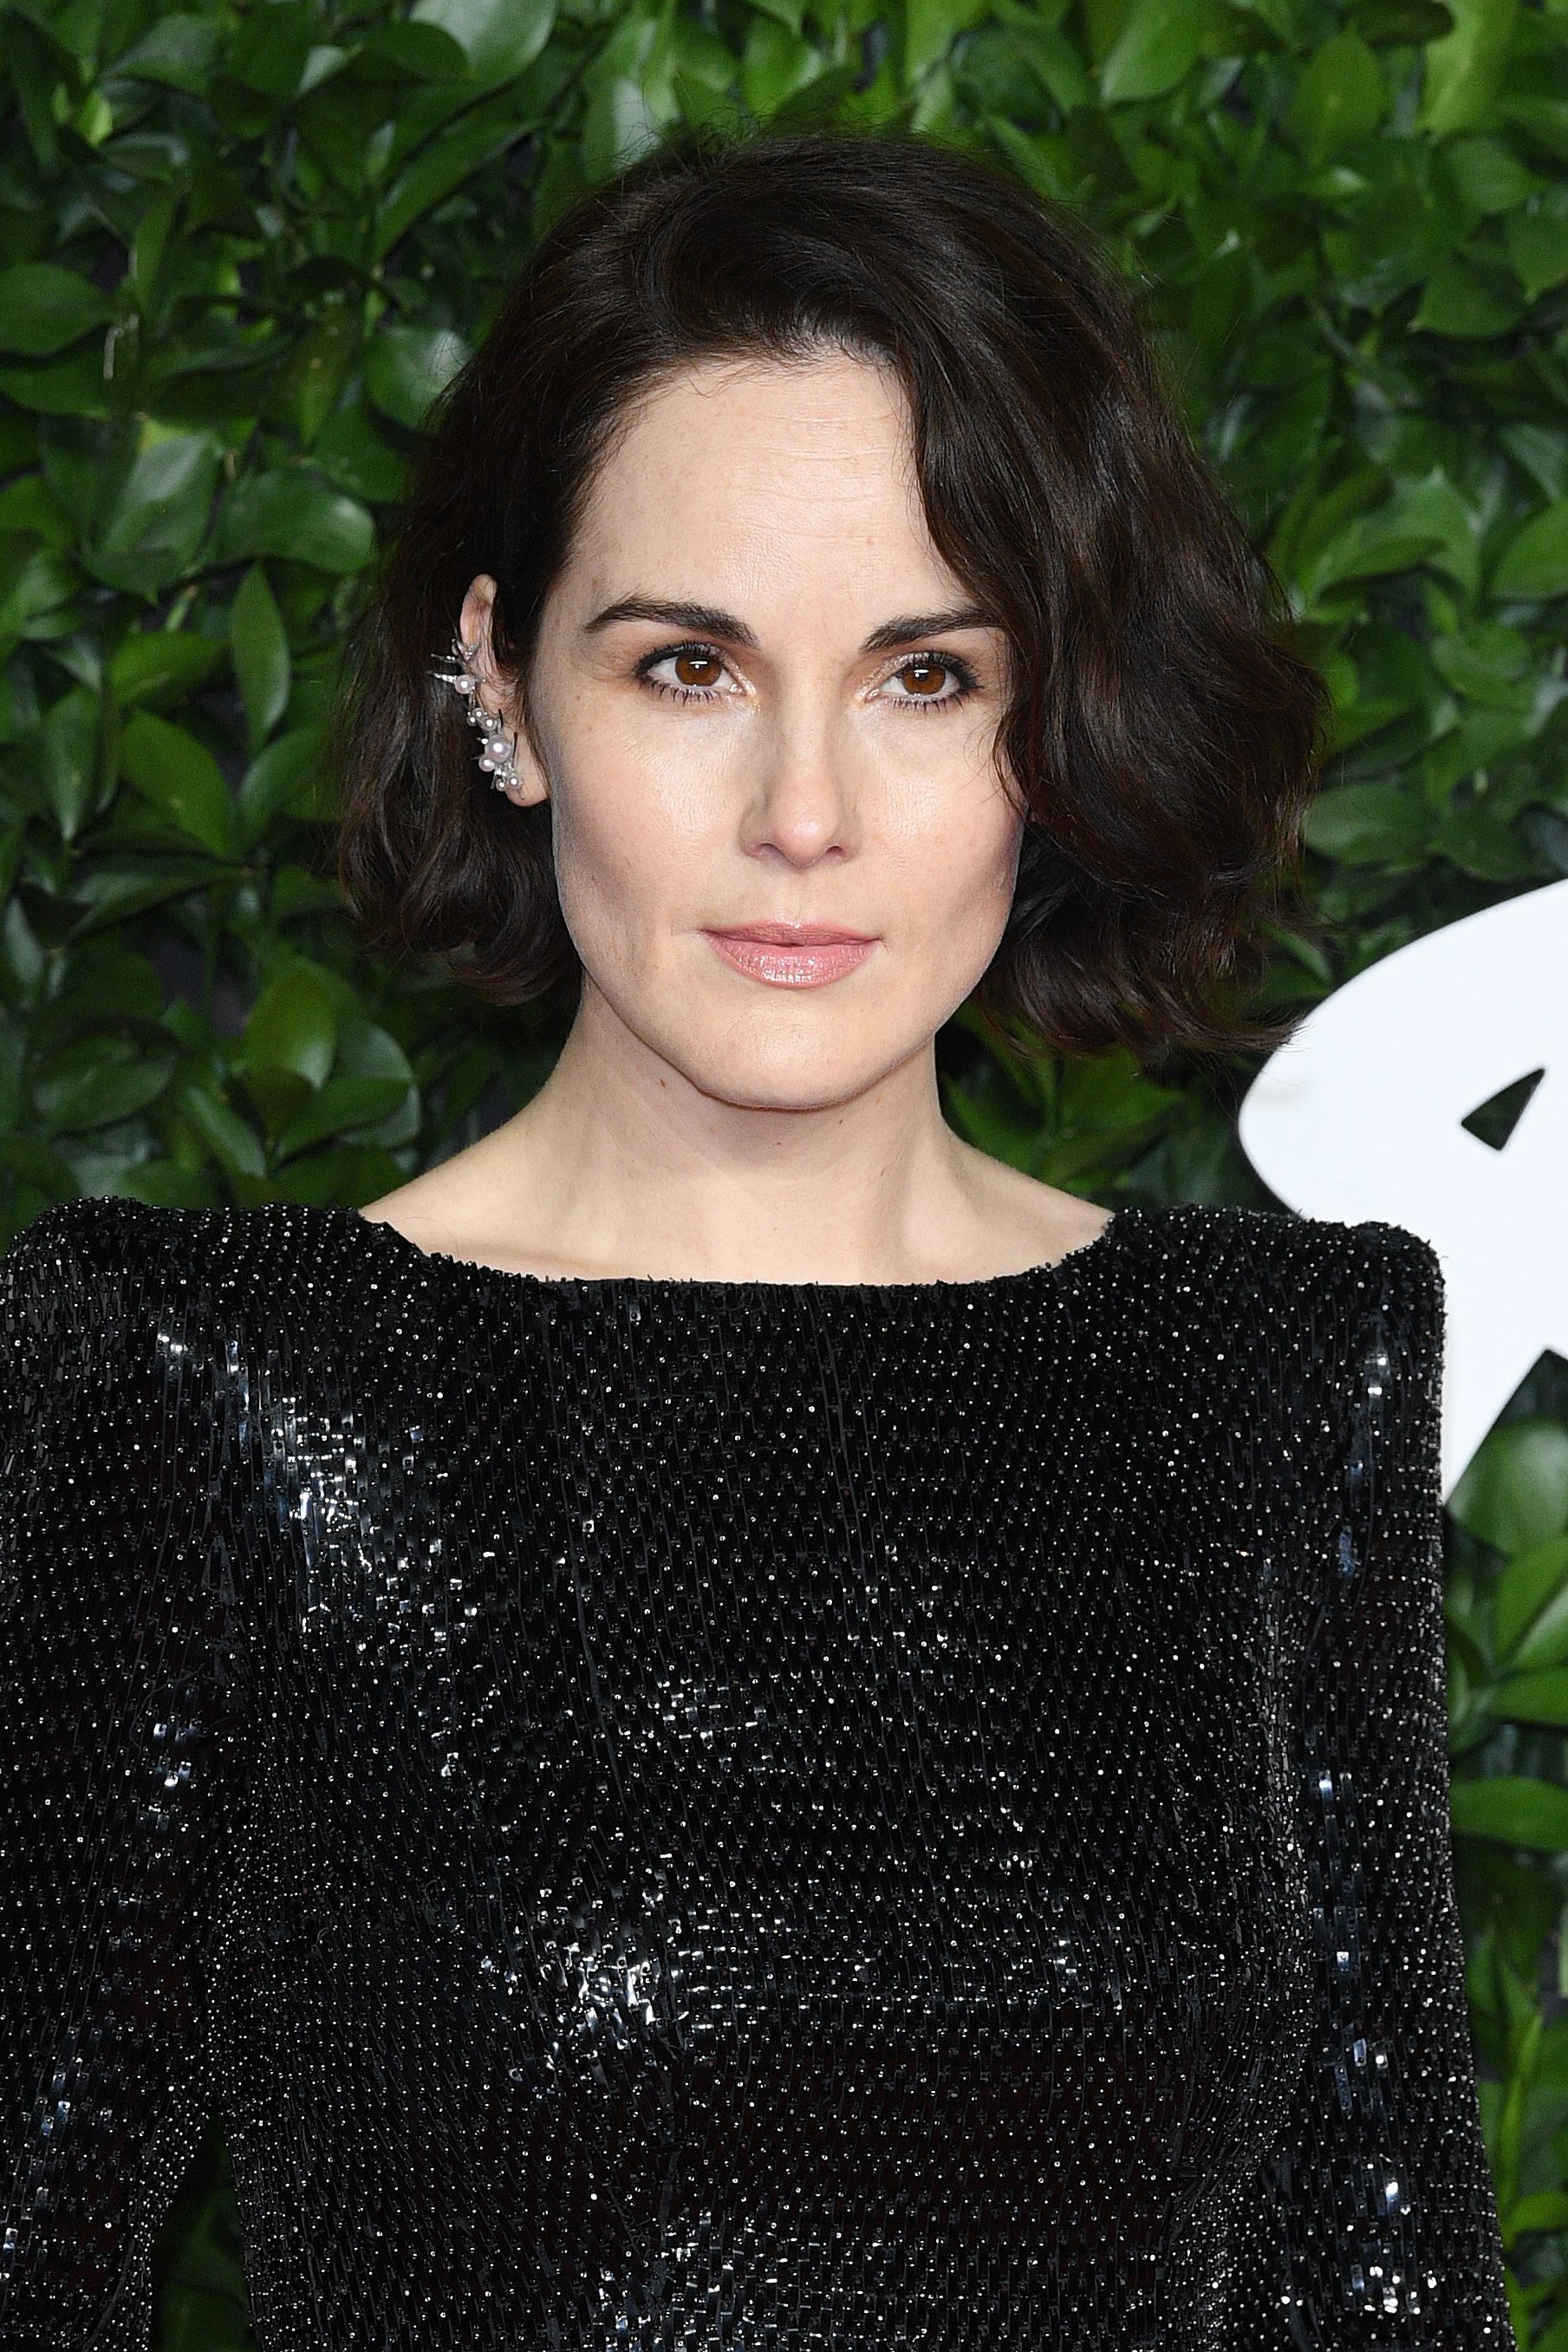 Michelle Dockery arrives at The Fashion Awards 2019 on December 02, 2019 | Photo: Getty Images